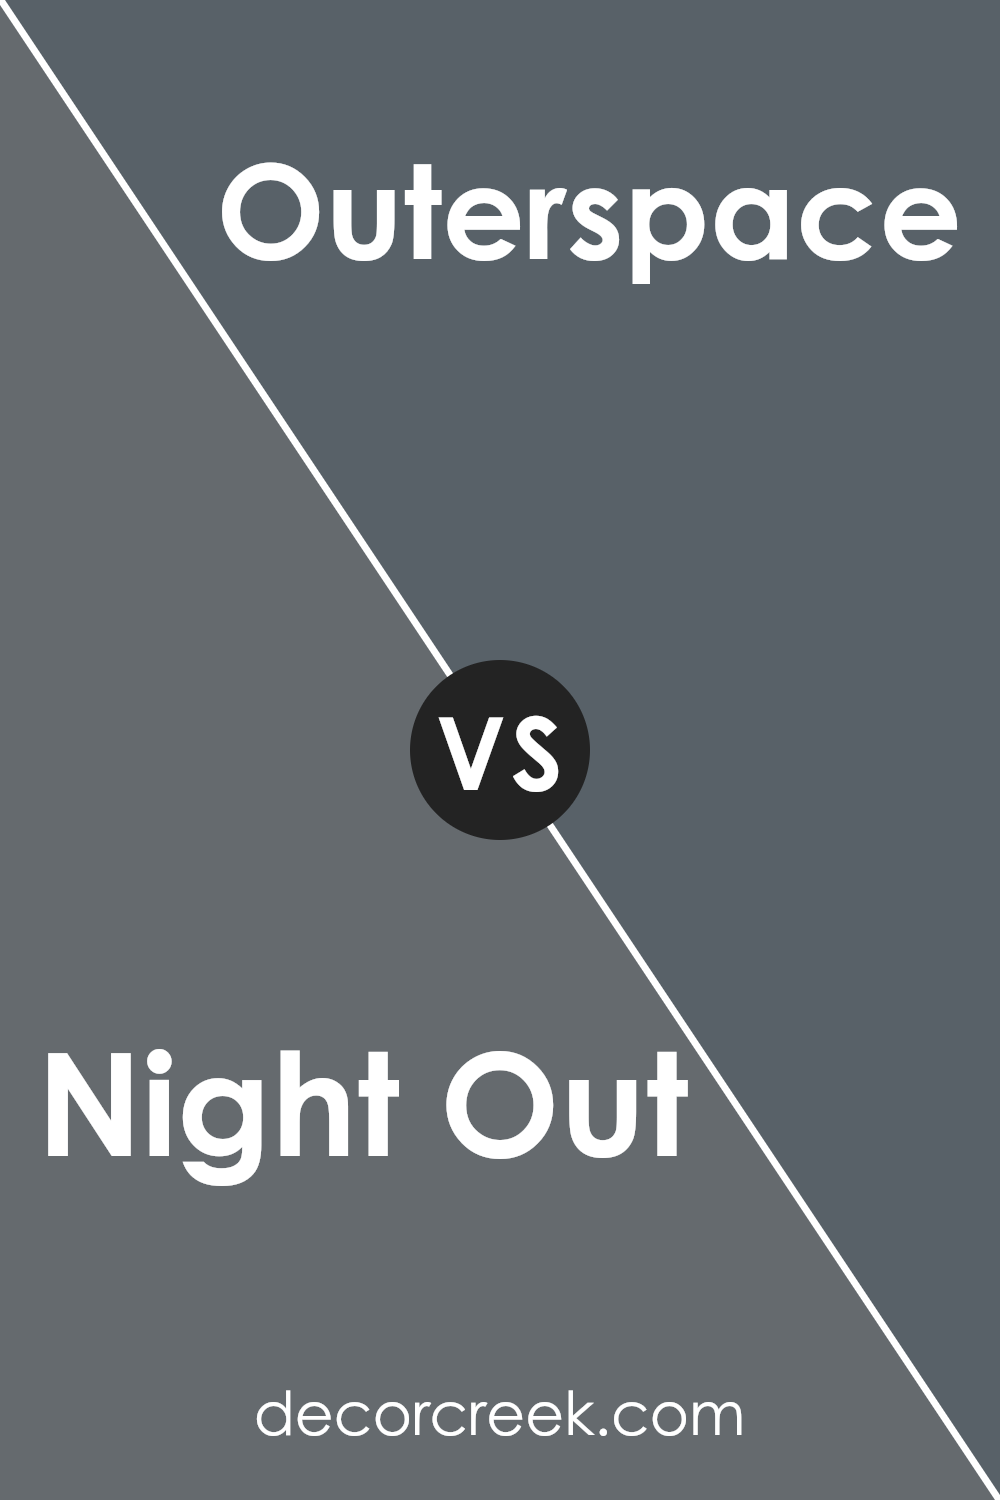 night_out_sw_9560_vs_outerspace_sw_6251